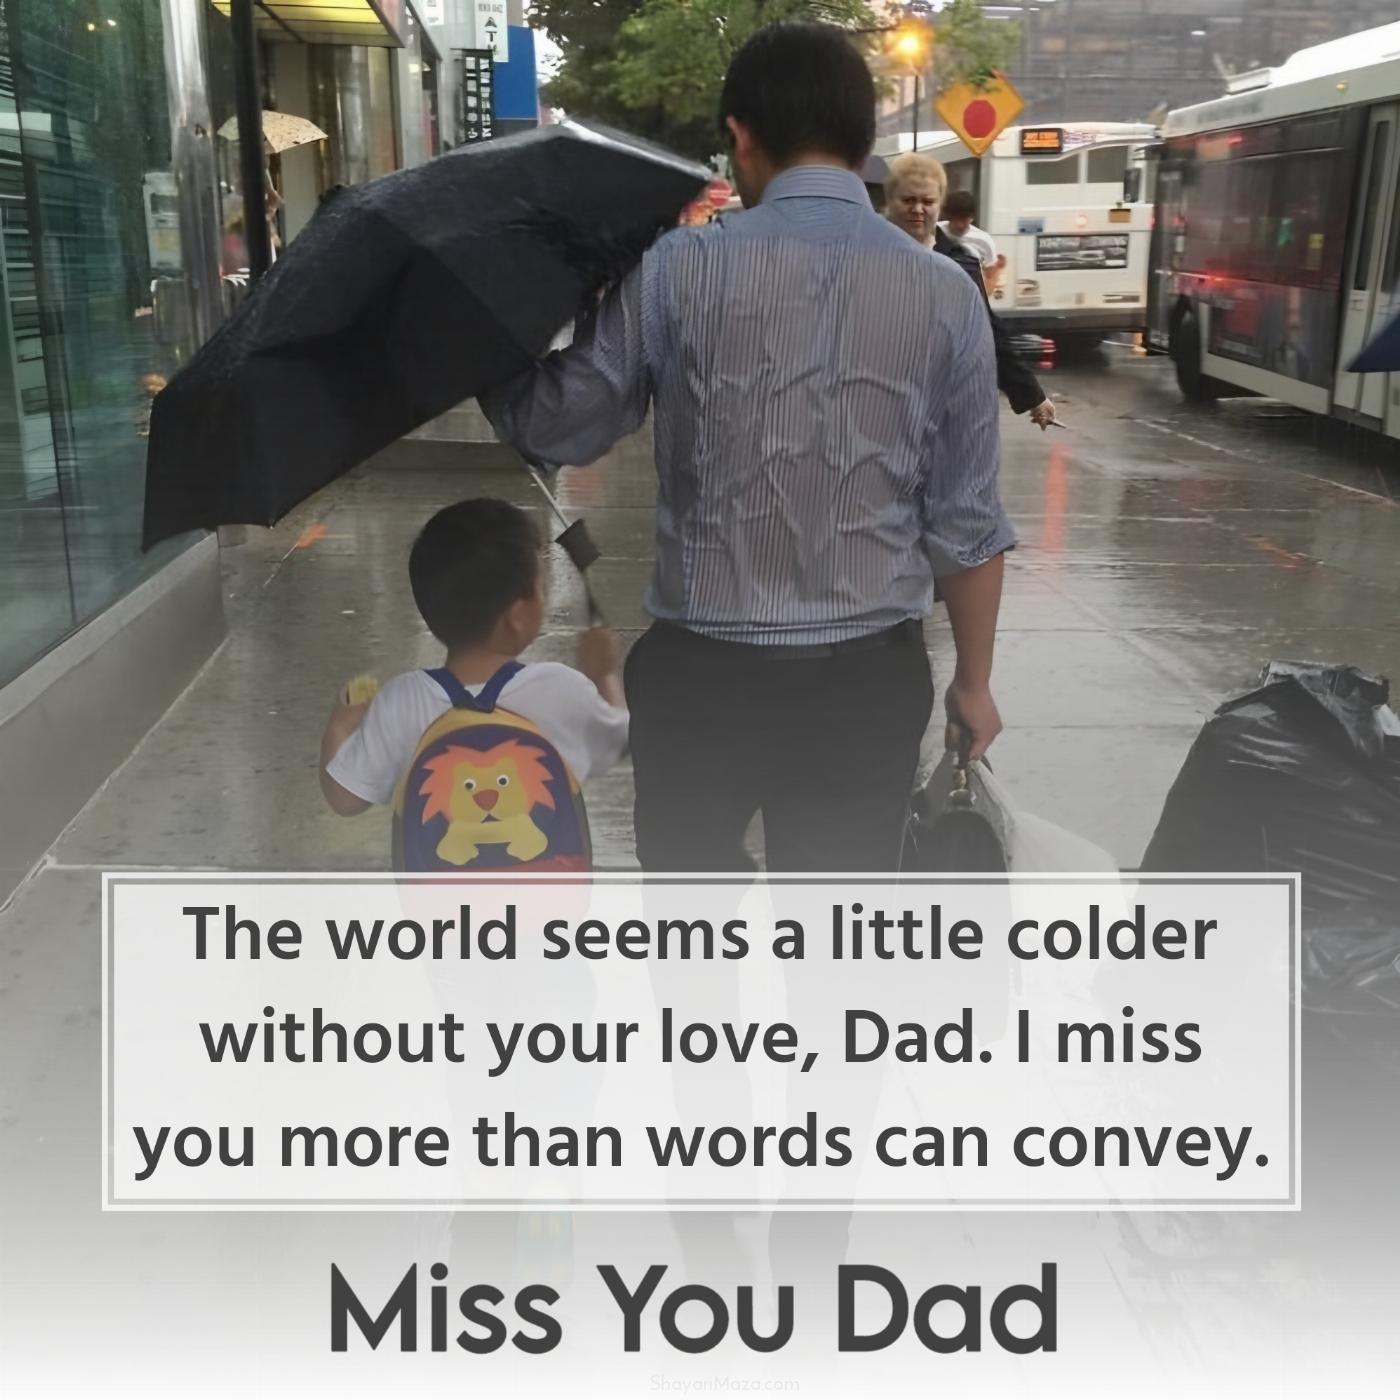 The world seems a little colder without your love Dad